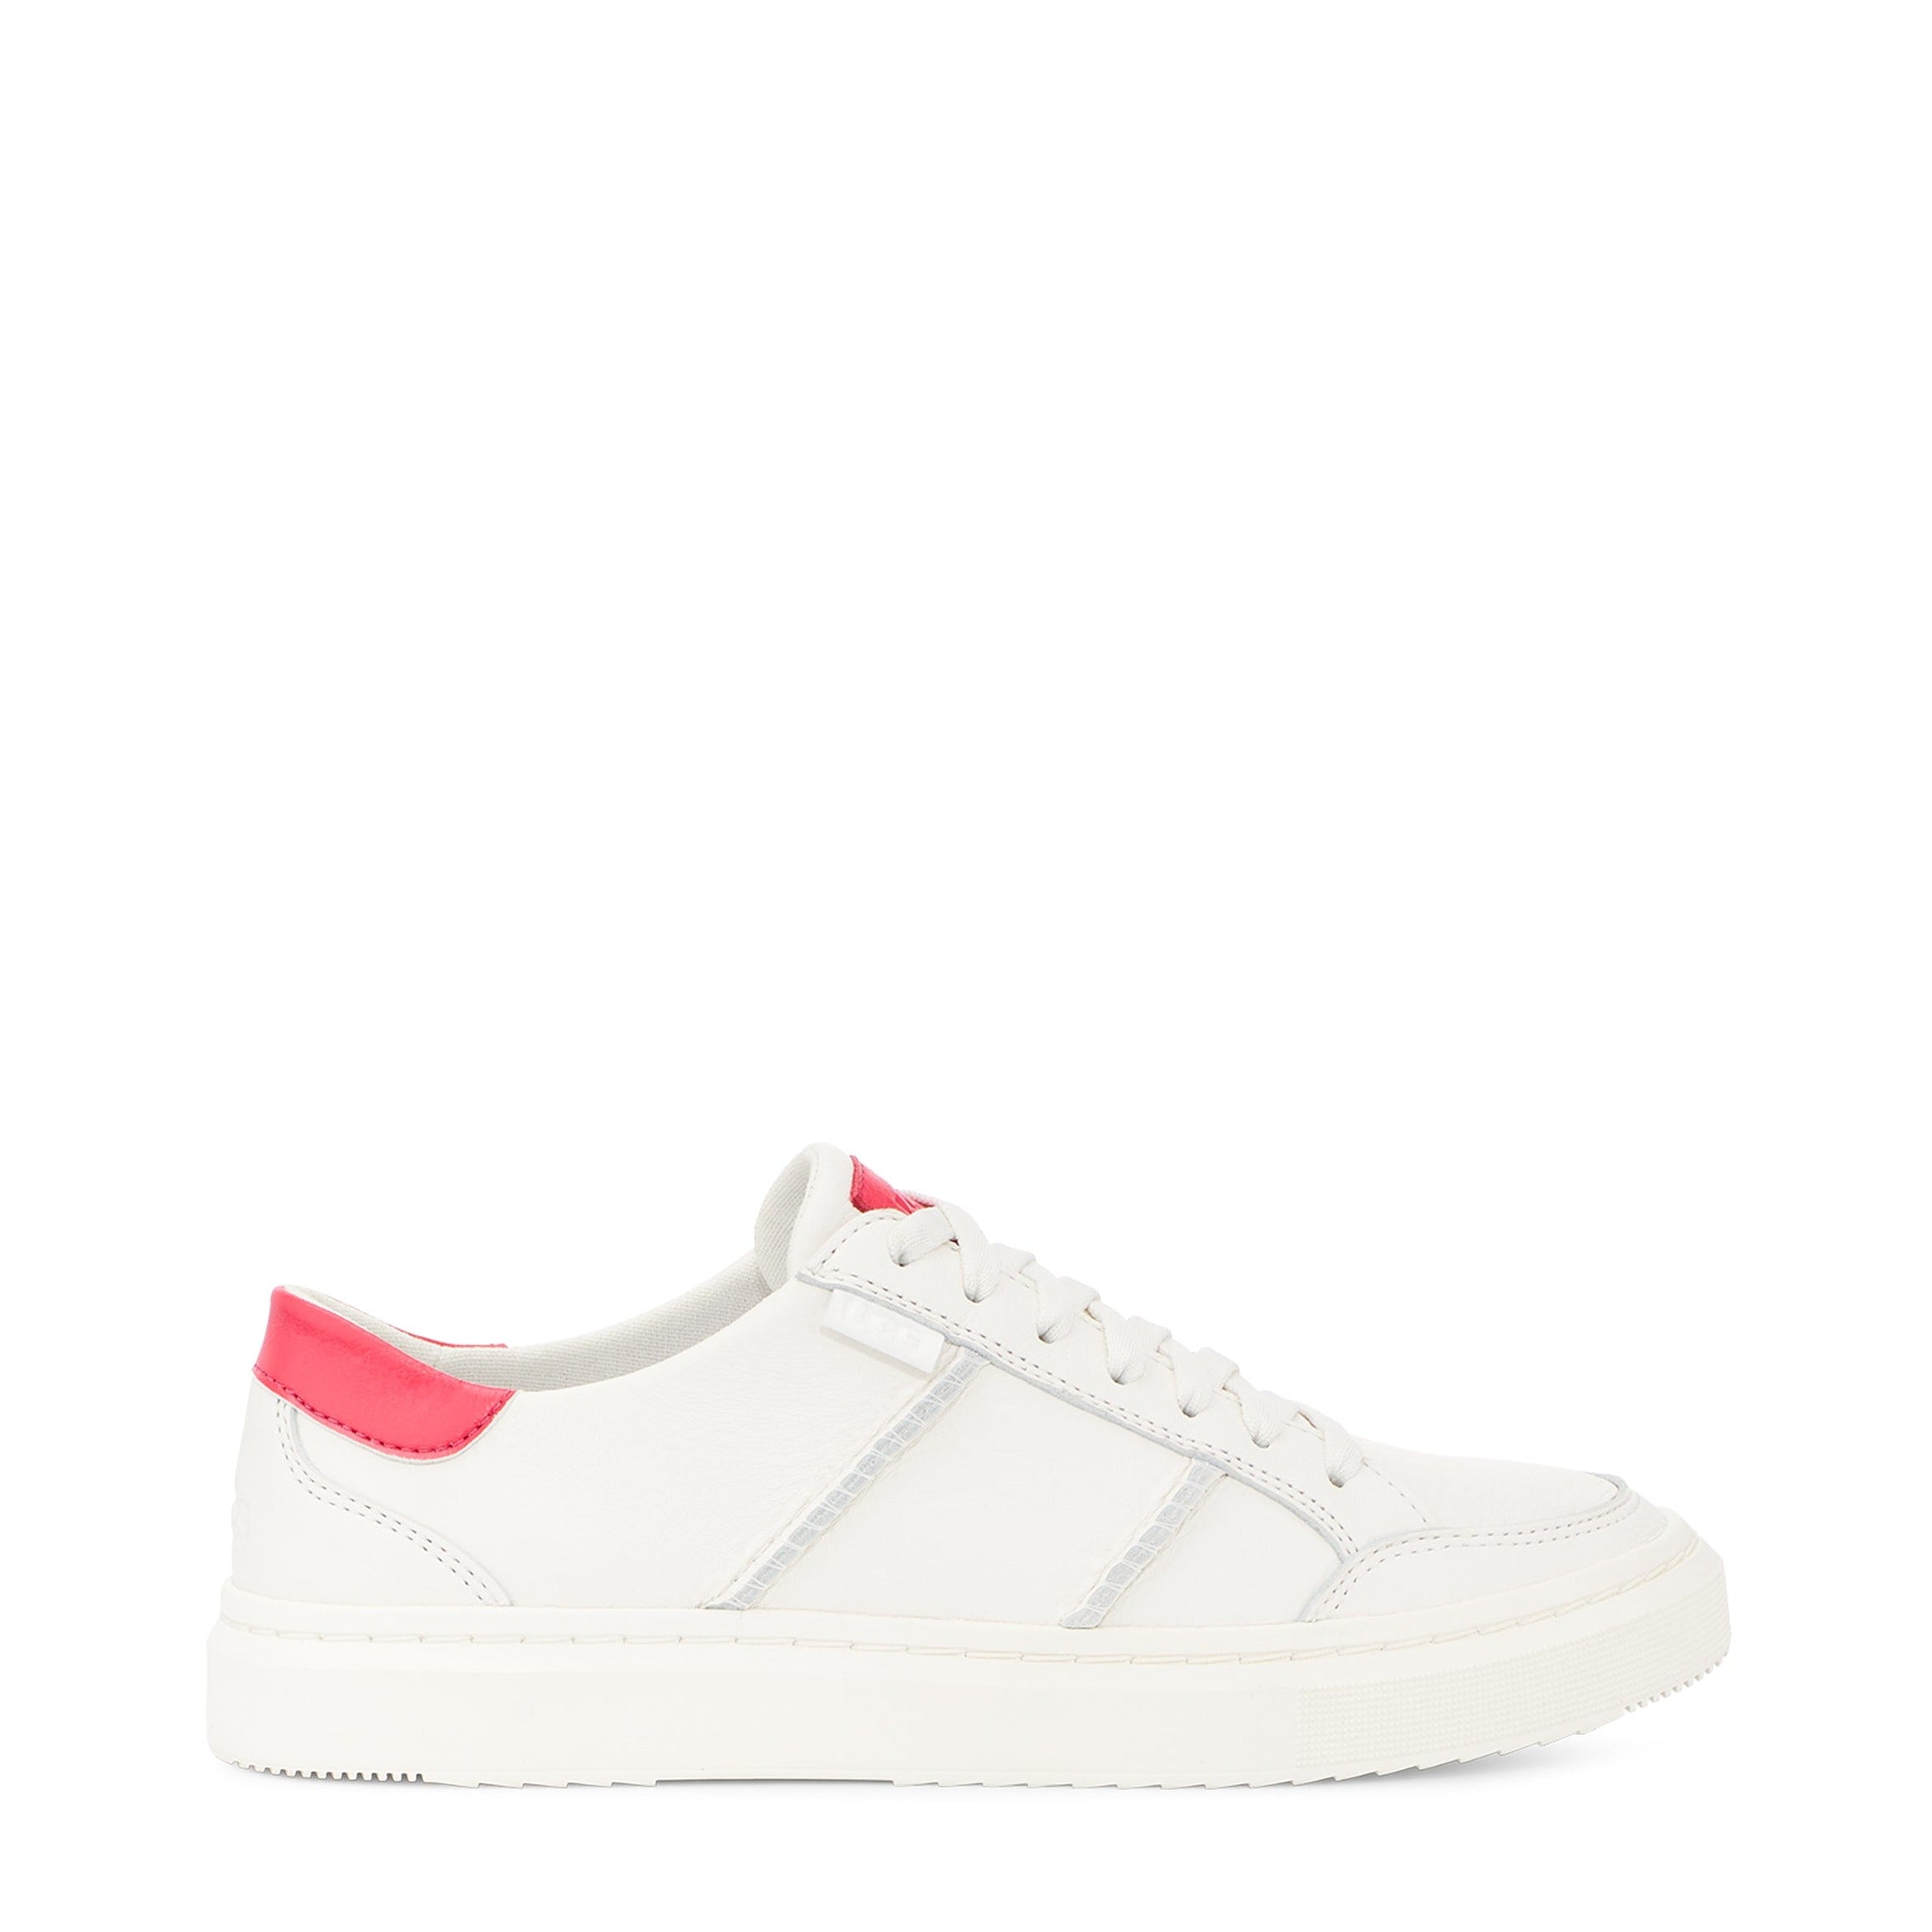 Sample UGG Alameda Lace Sneaker Bright White/Red Pepper  